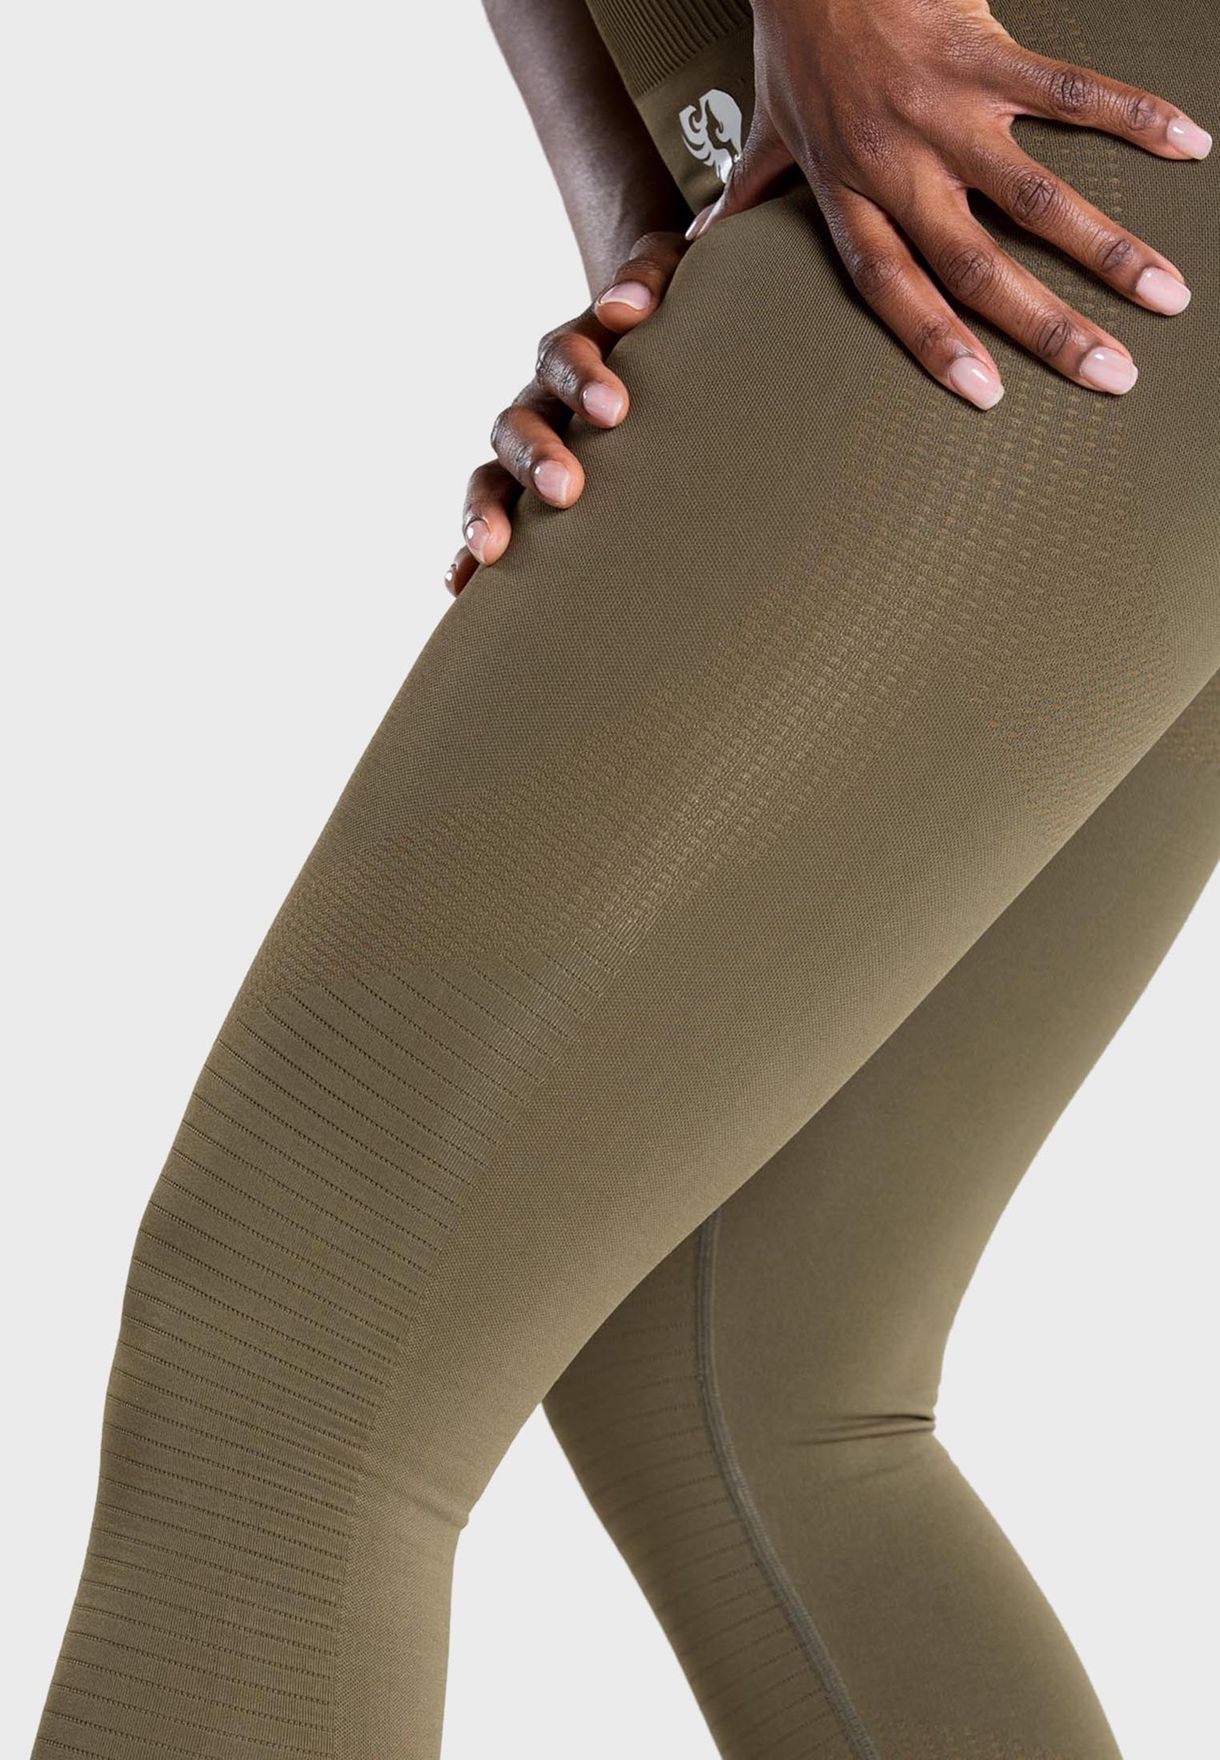 Power Seamless Tights